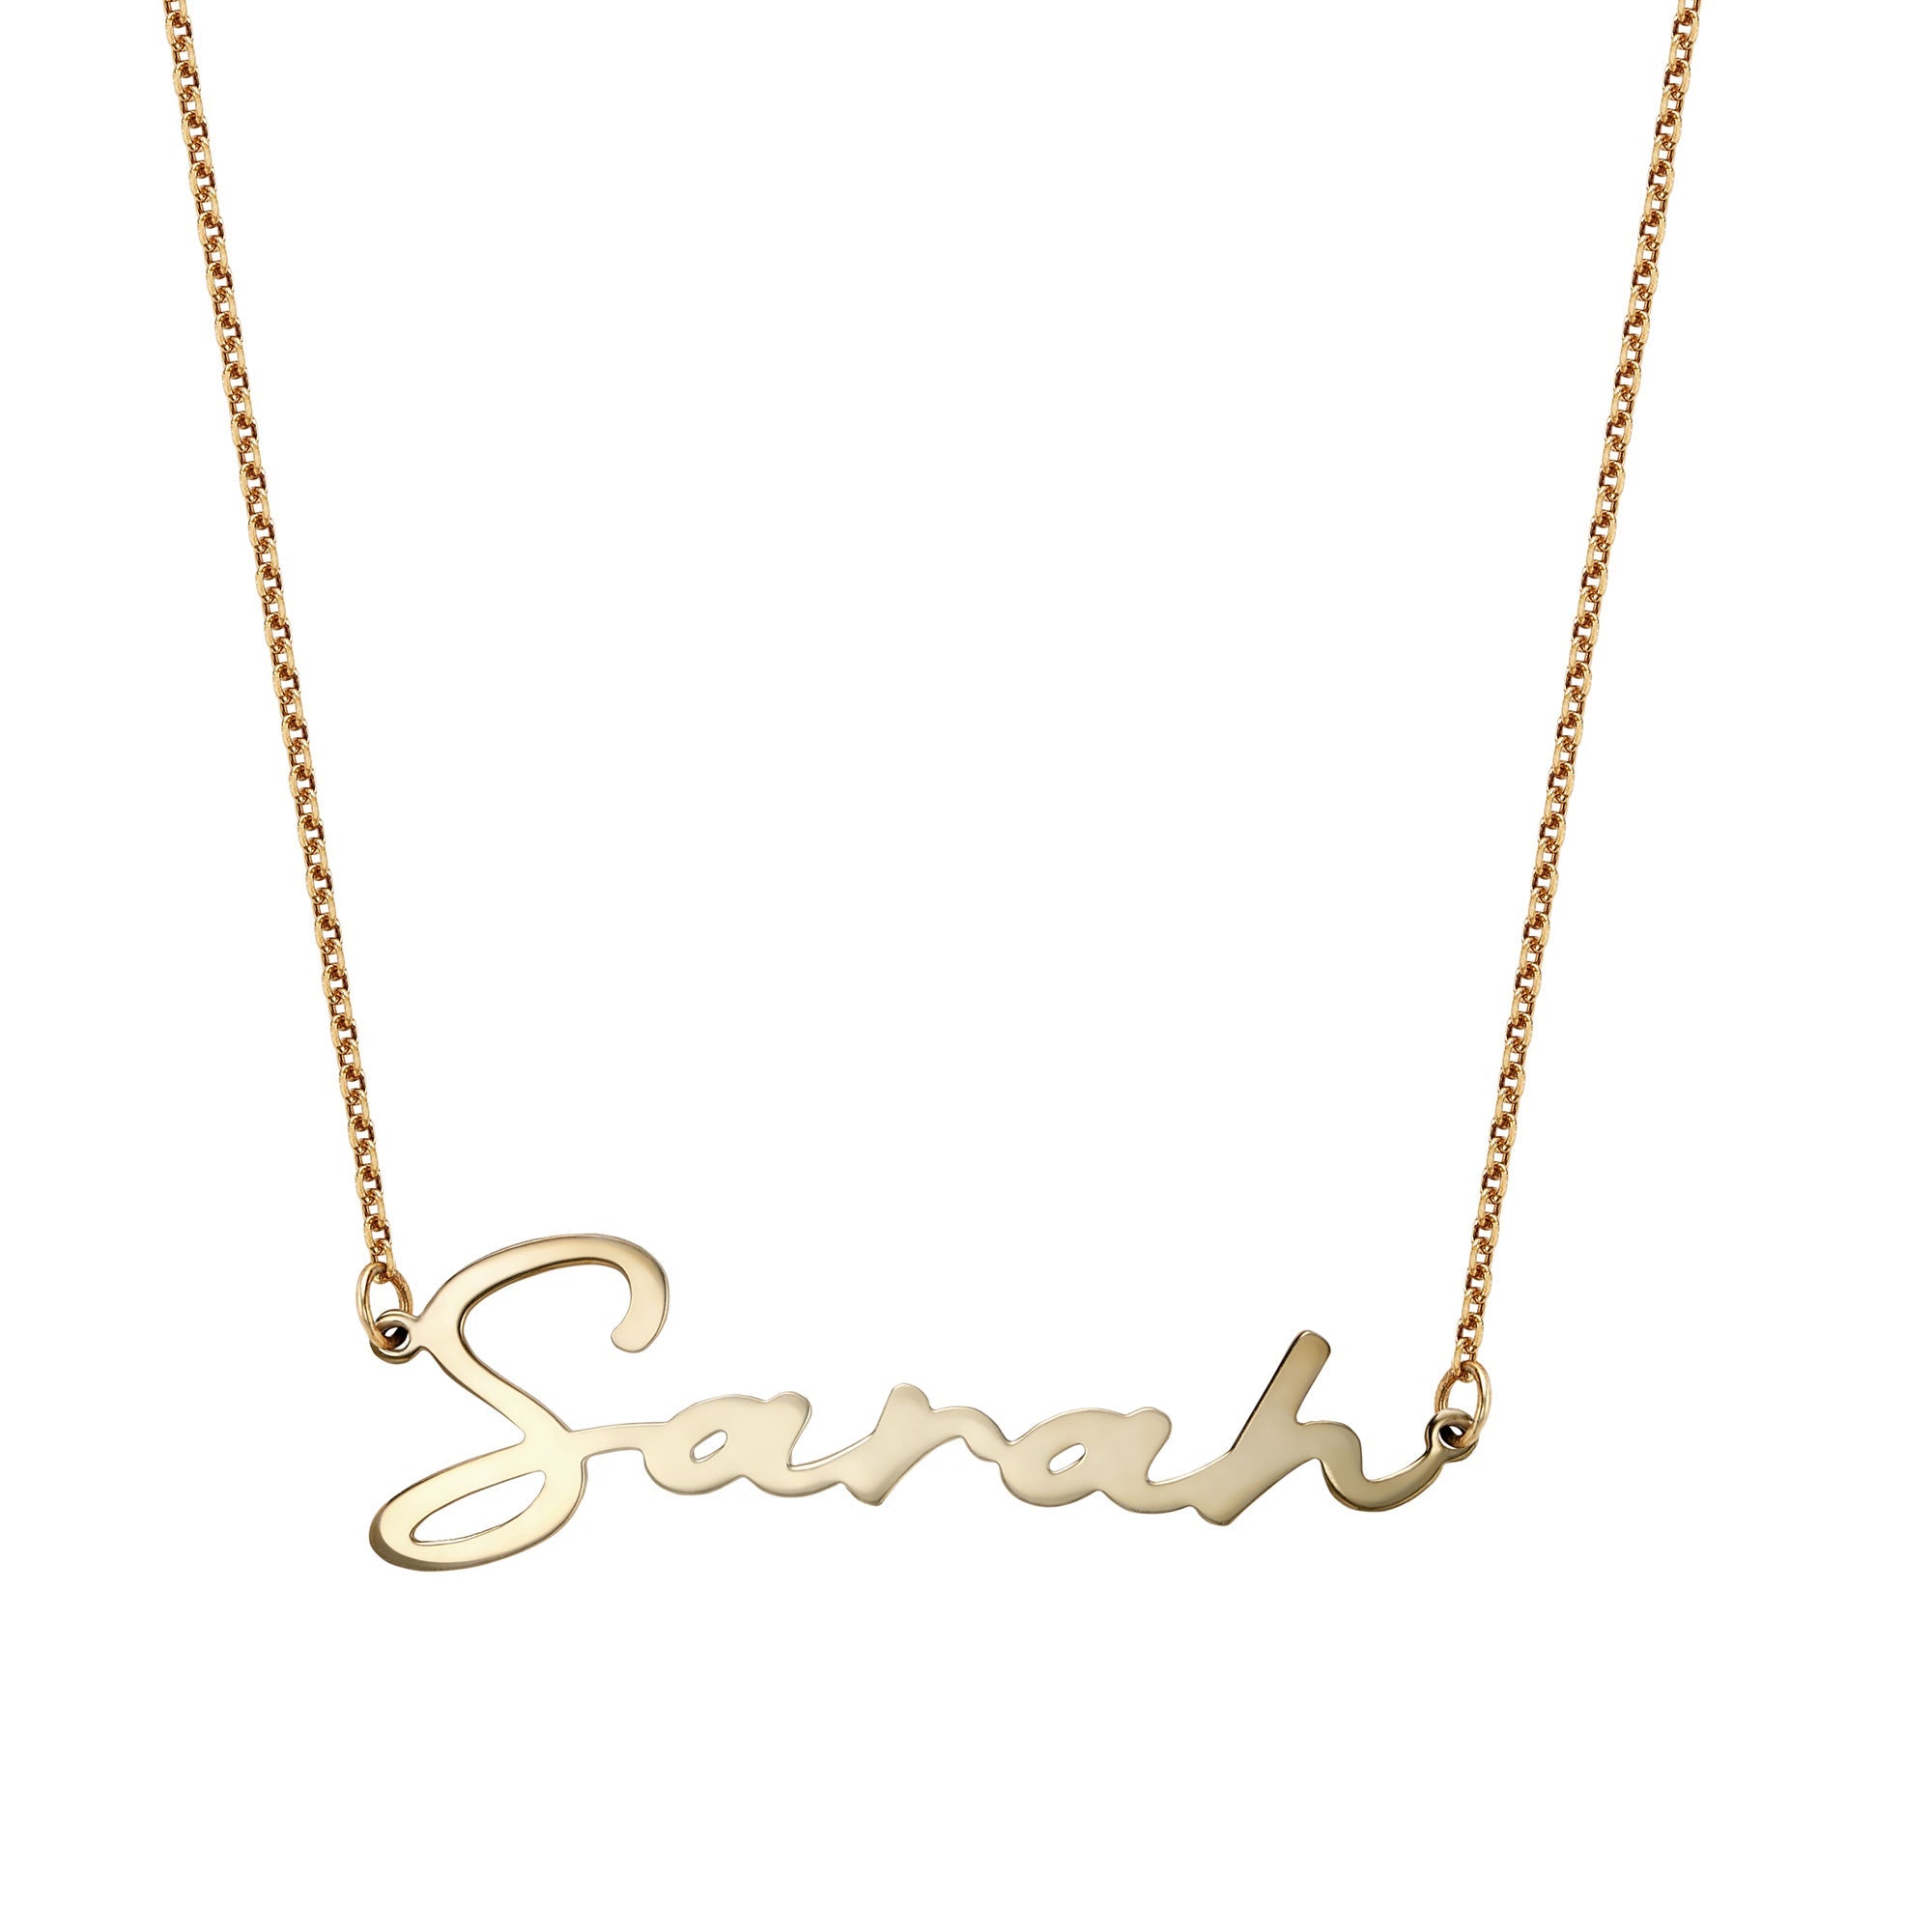 Signature Name Necklace Silver